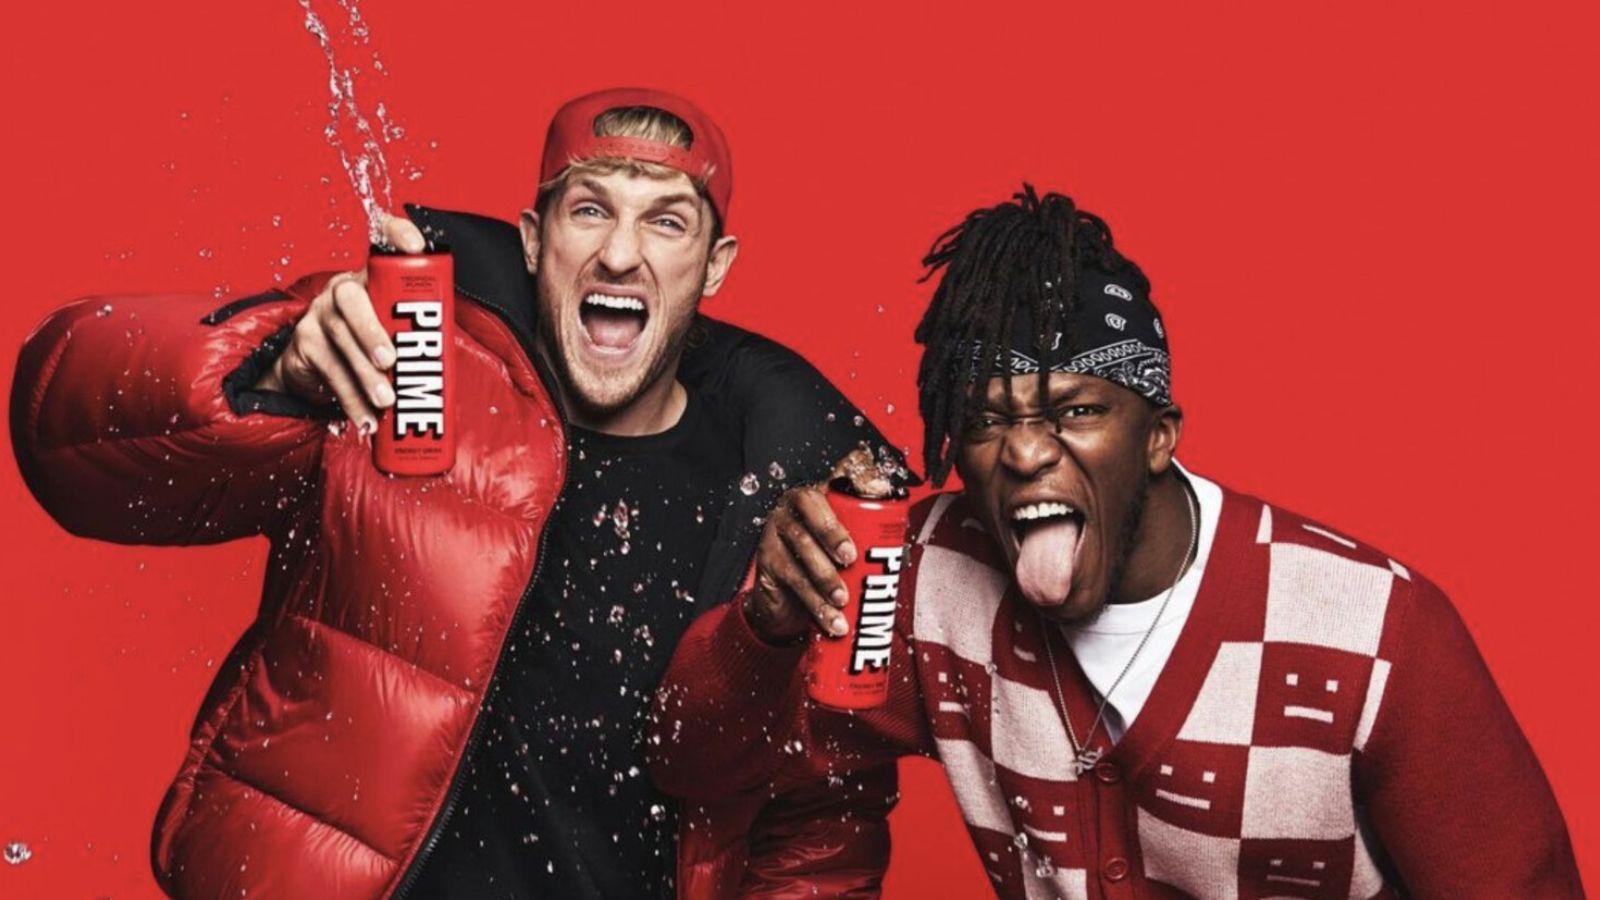 logan paul and ksi with their prime drinks